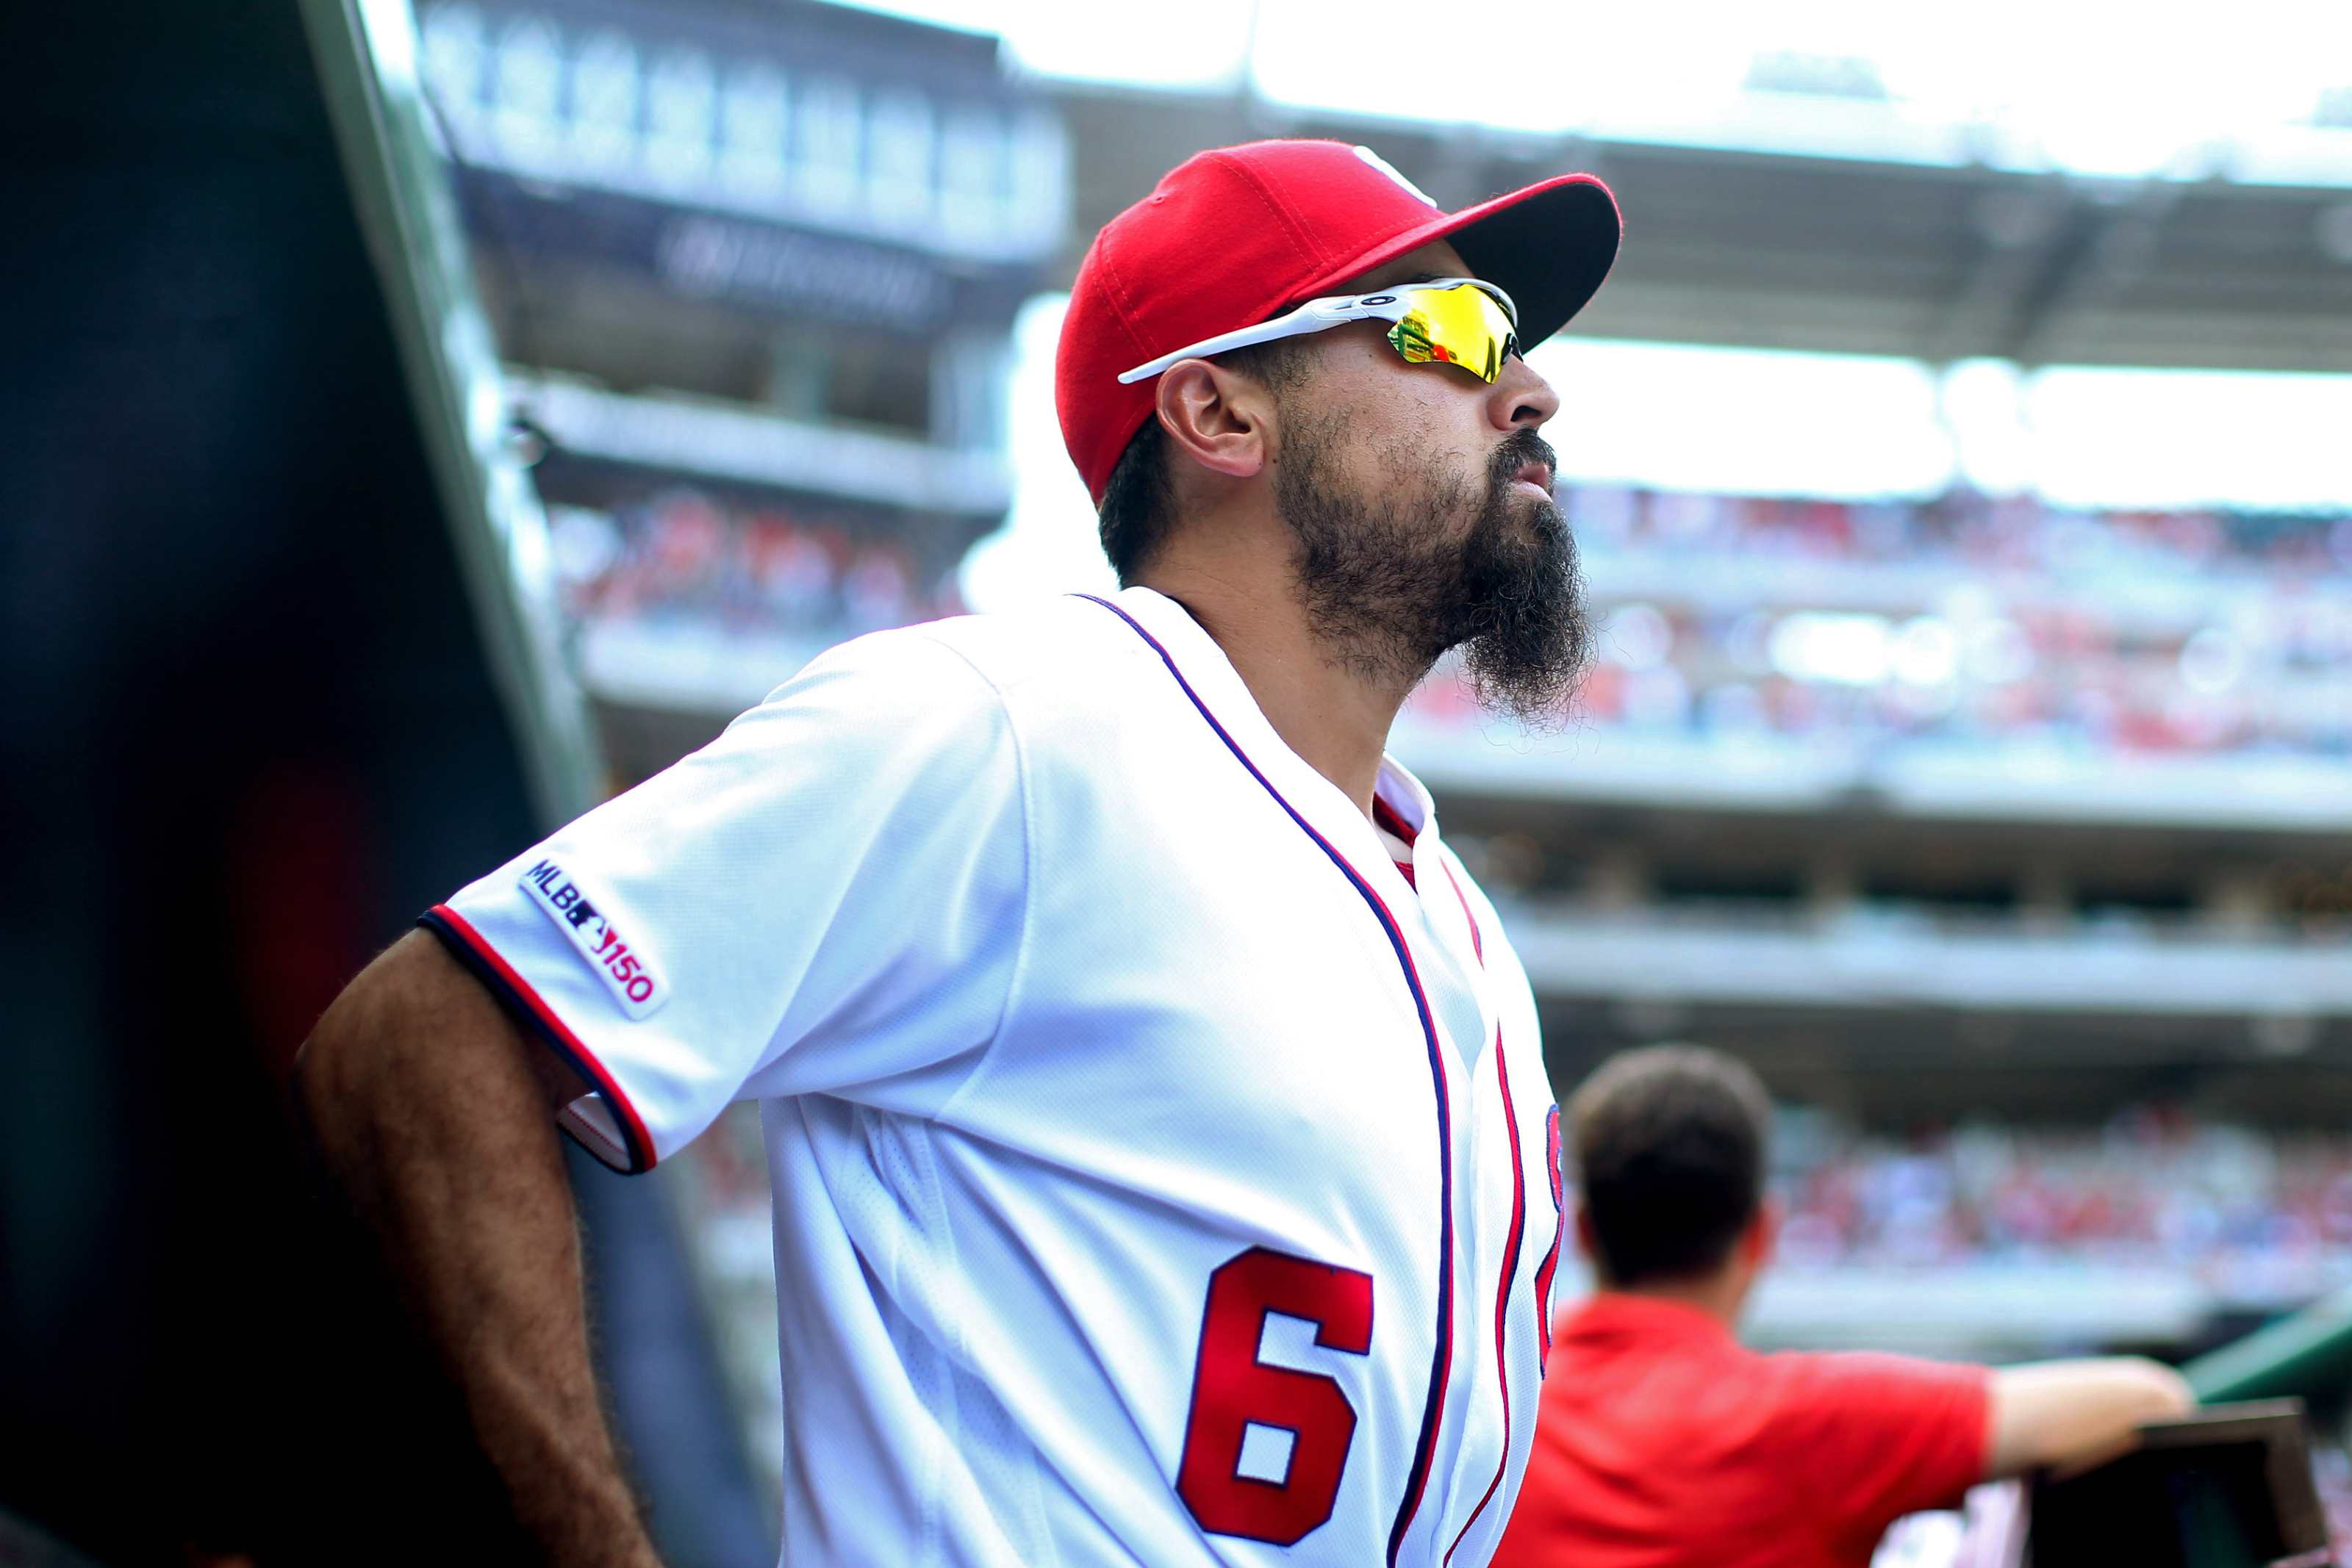 MLB: Washington Nationals' Anthony Rendon wants more fans to show up